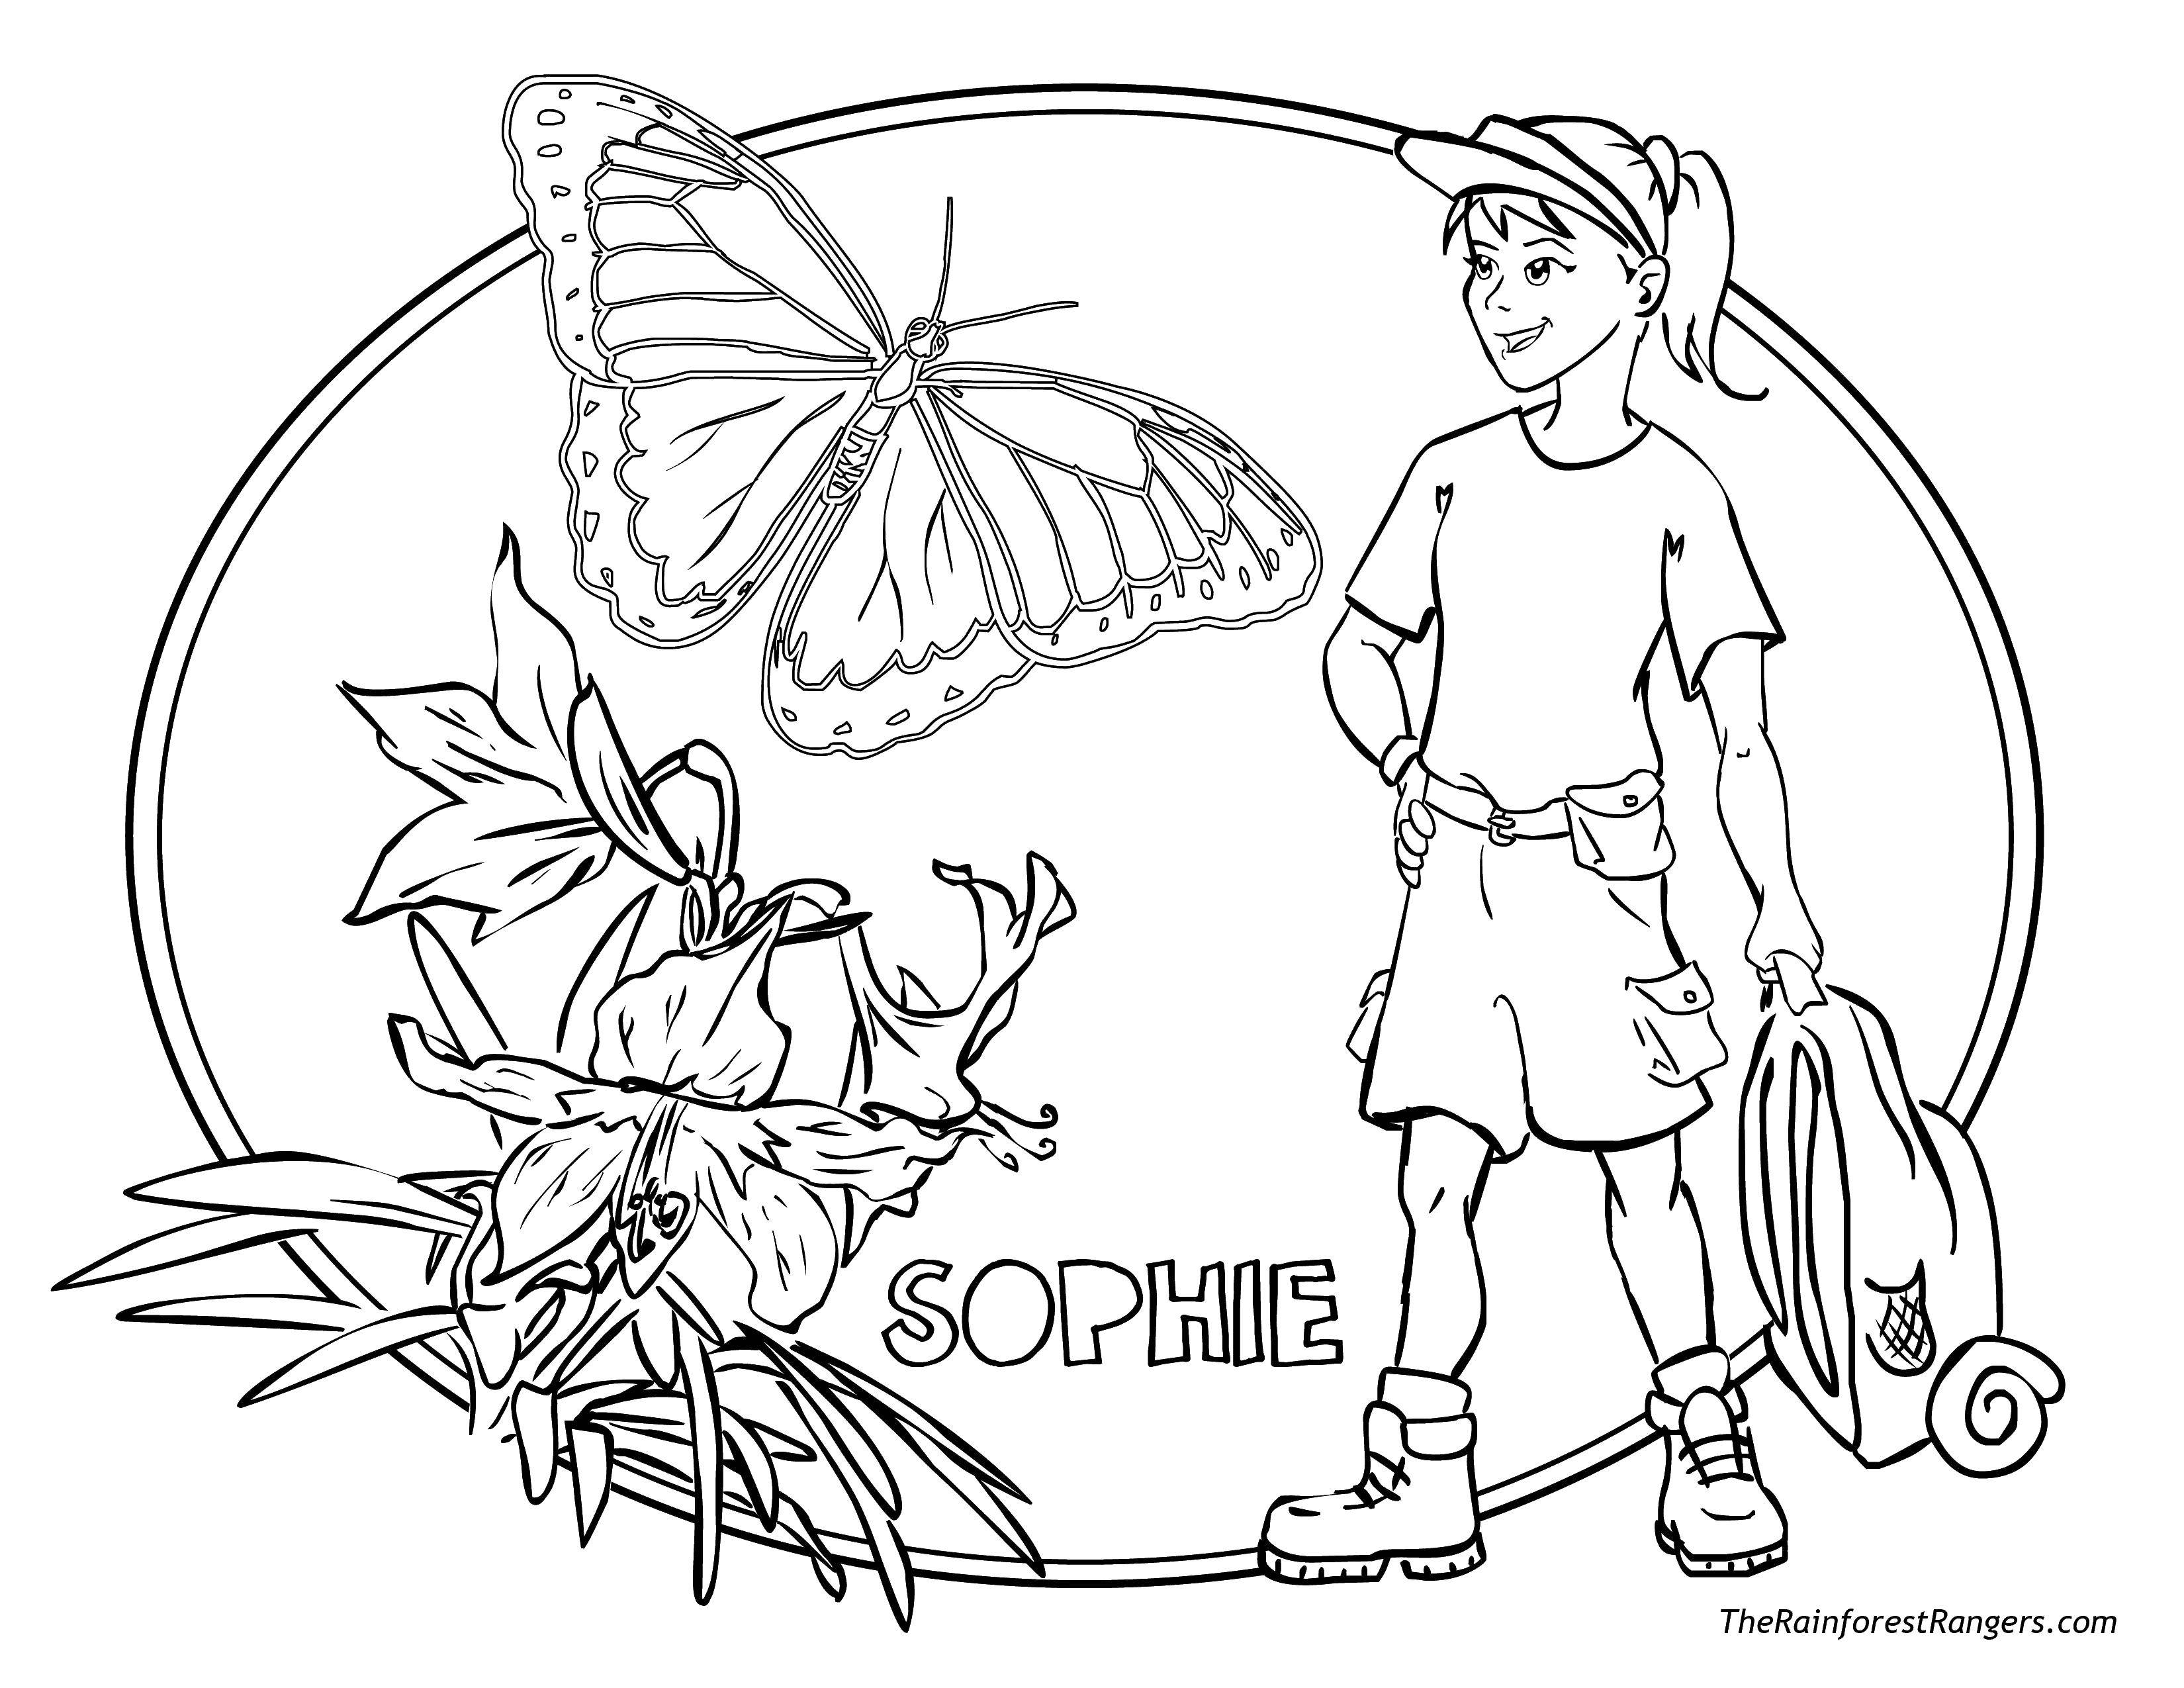 Coloring Sophie. Category Girl. Tags:  girl, girls, Sophie.